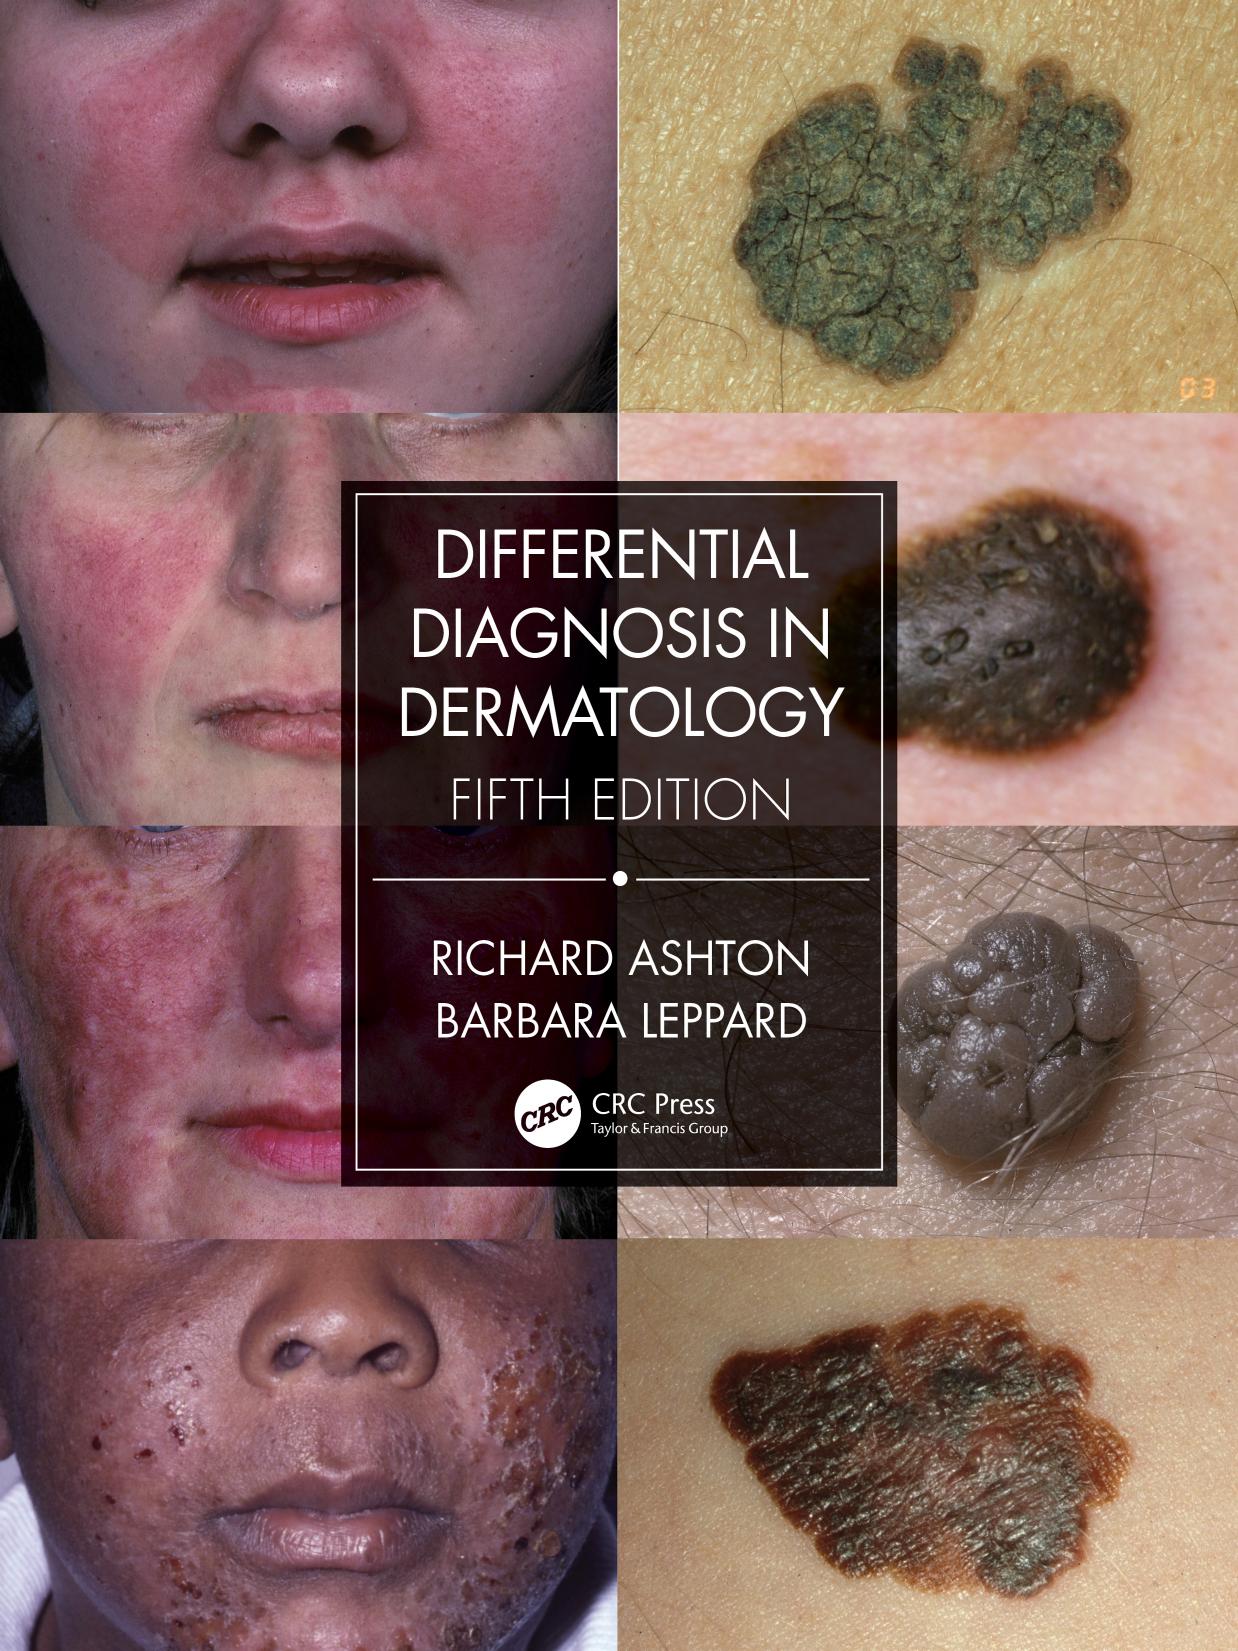 Differential Diagnosis in Dermatology, 5th Edition by Richard Ashton Barbara Leppard